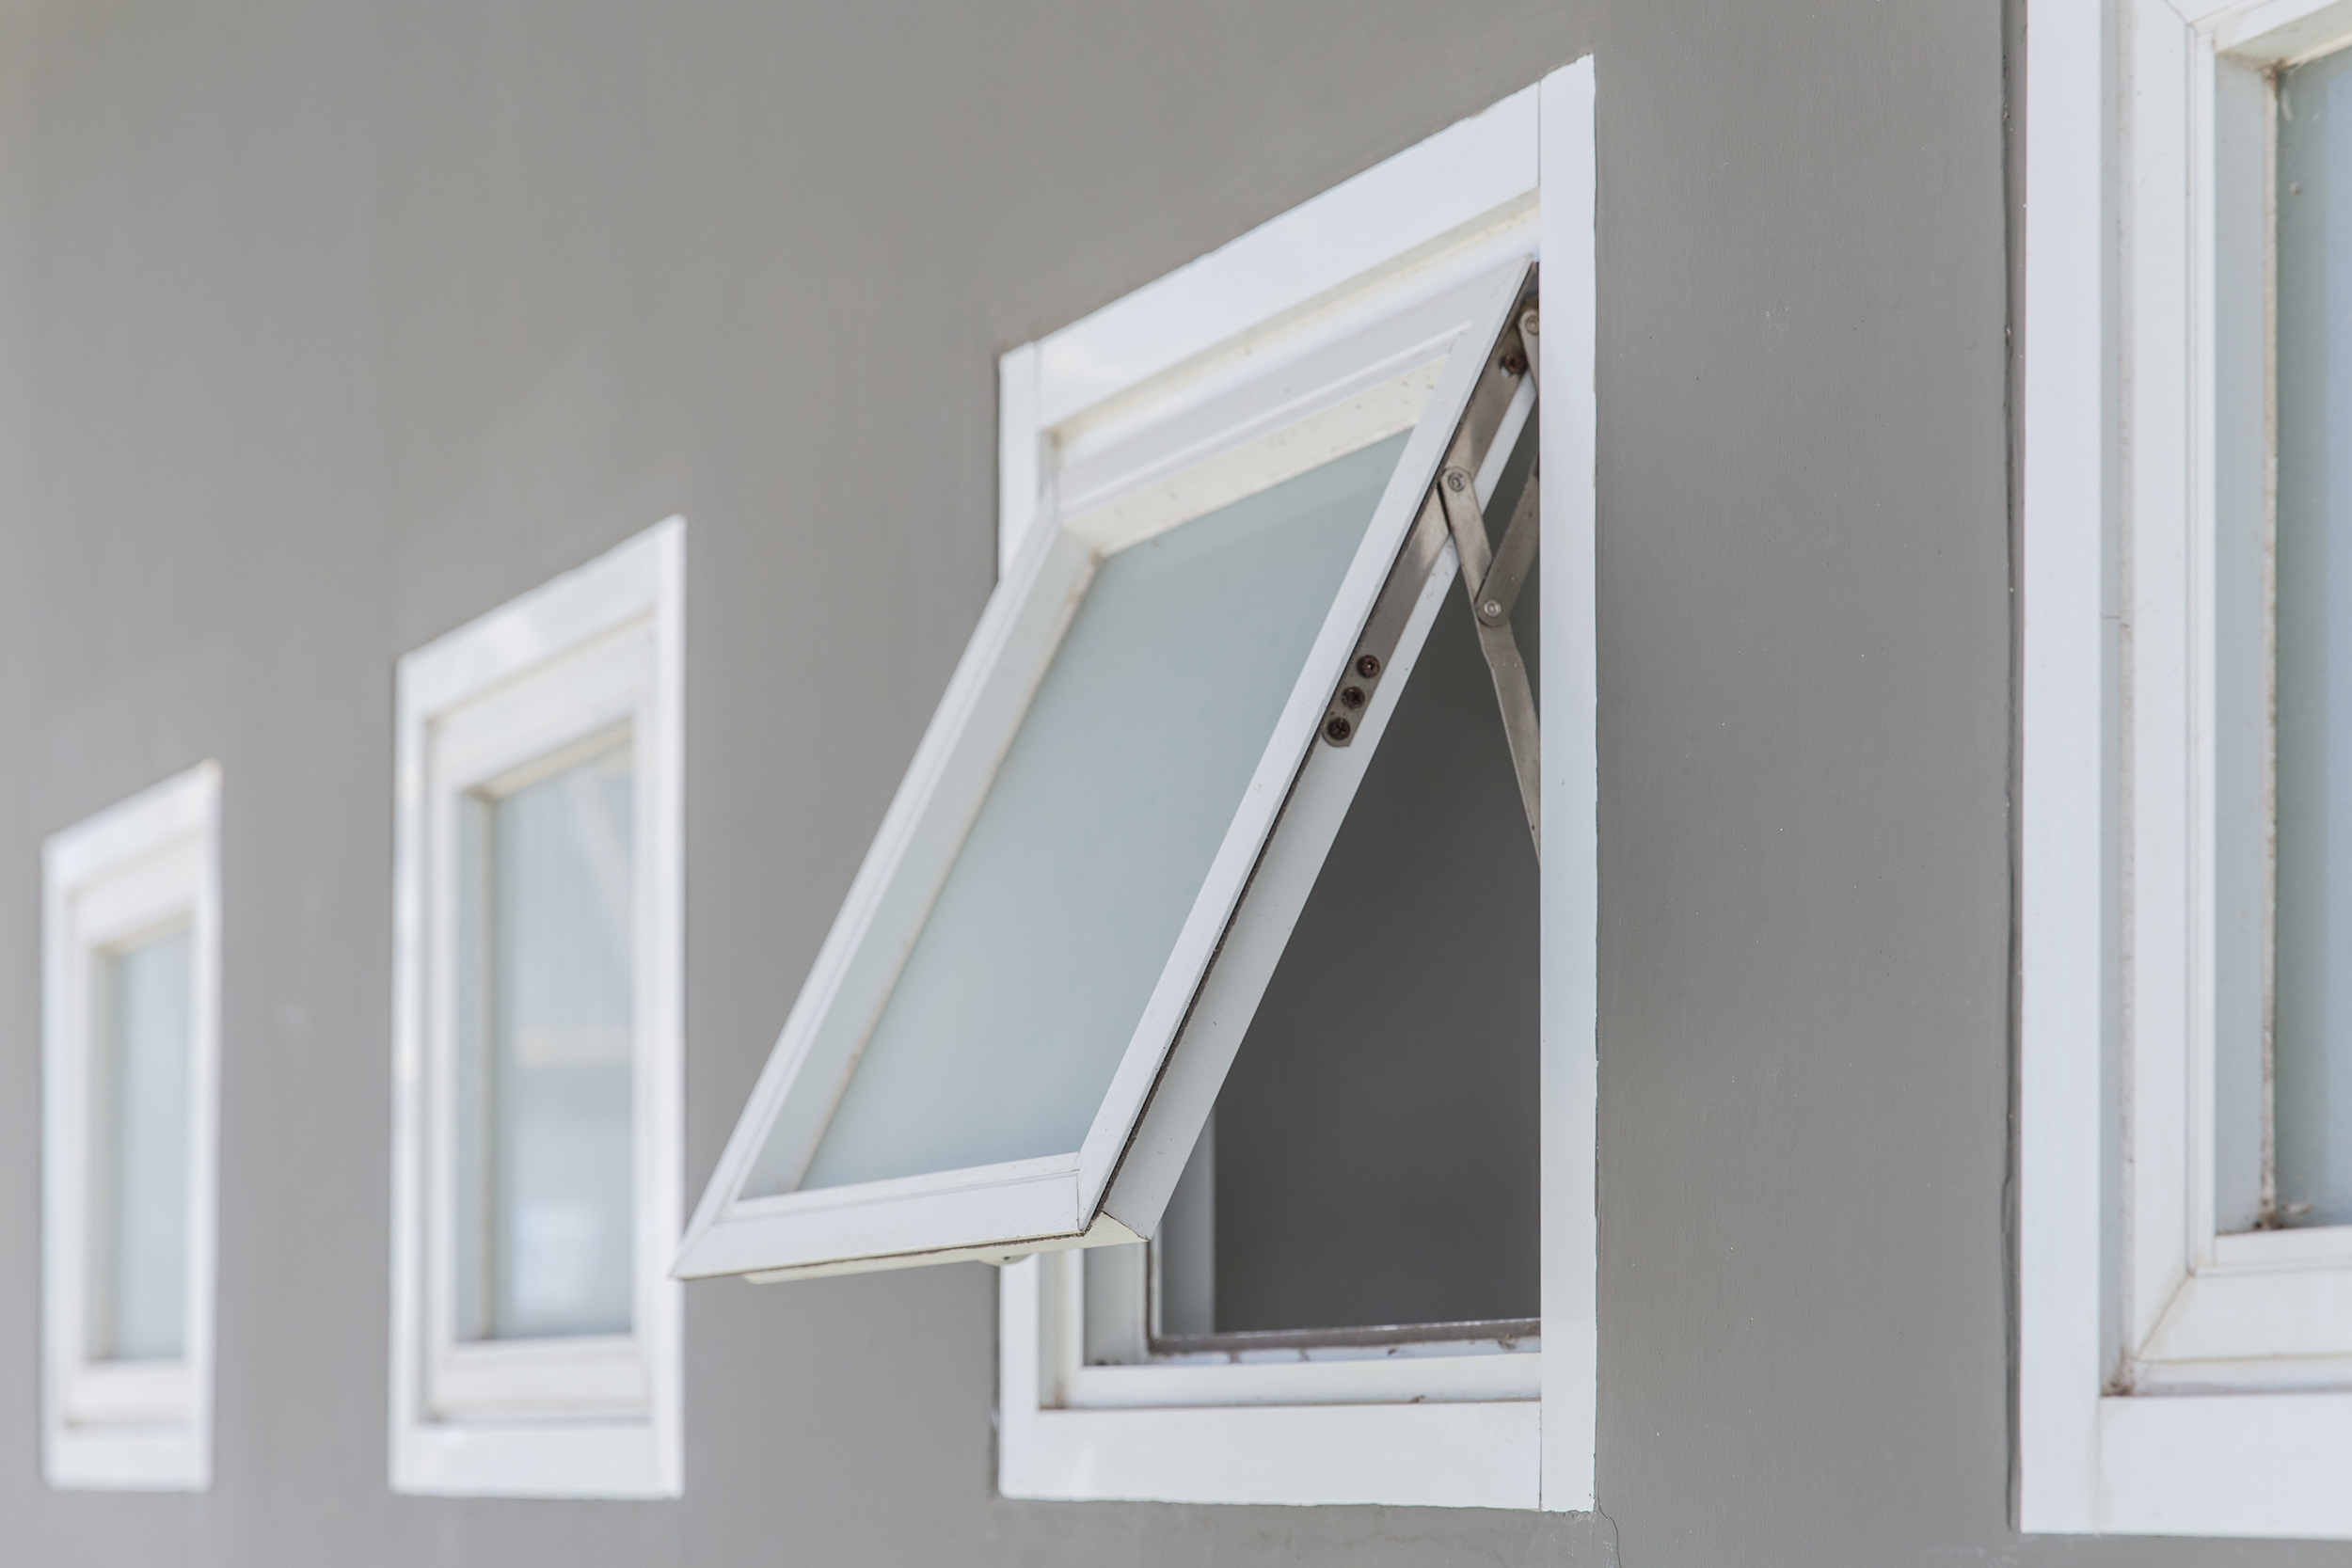 Awning windows are ideal for metro Detroit homes. Contact DeYonker Window & Door for Andersen awning window installation.